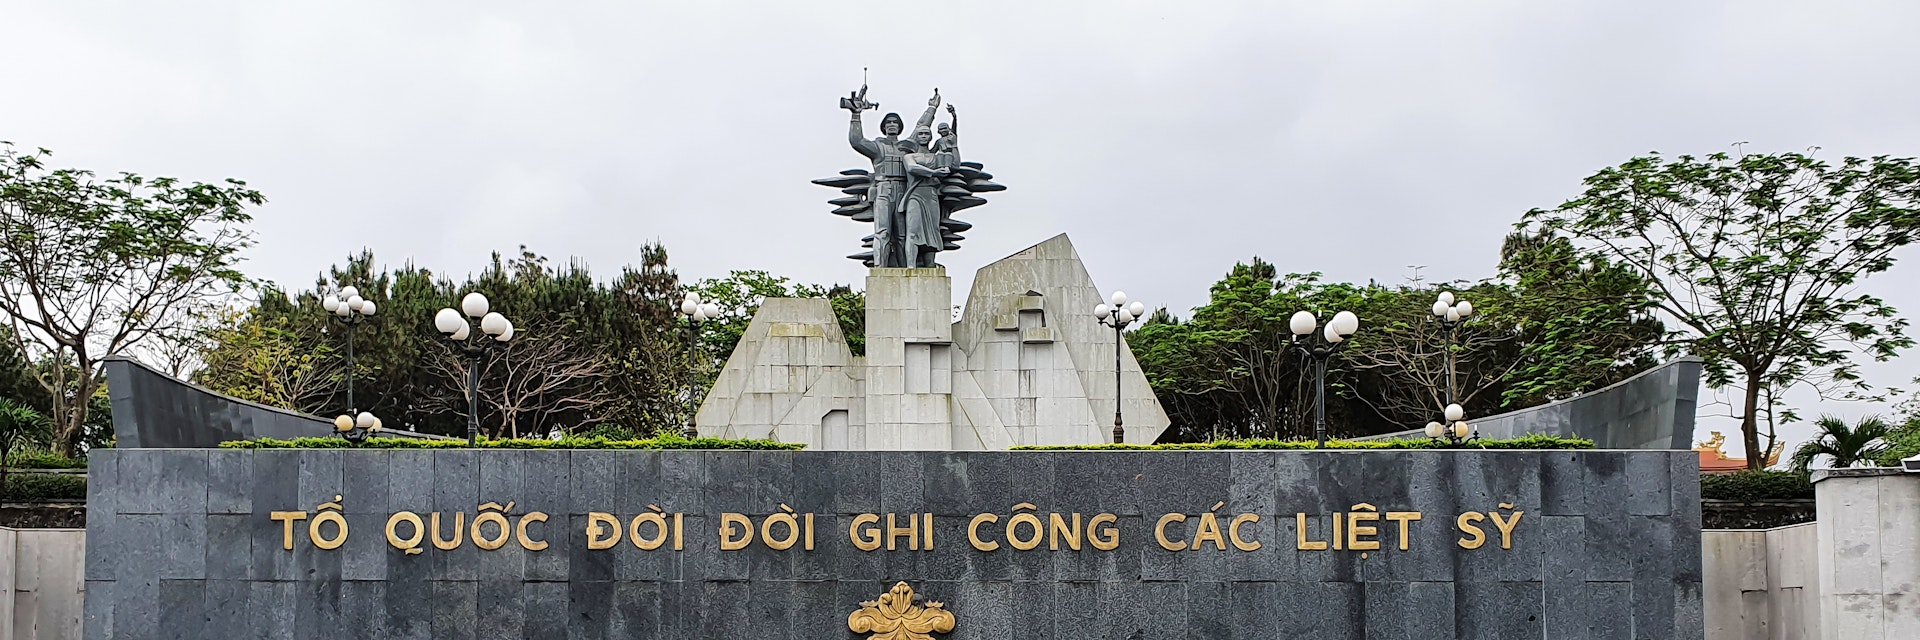 Memorial Monument At Road 9 National Martyrs Cemetery In Quang Tri Province, Vietnam.